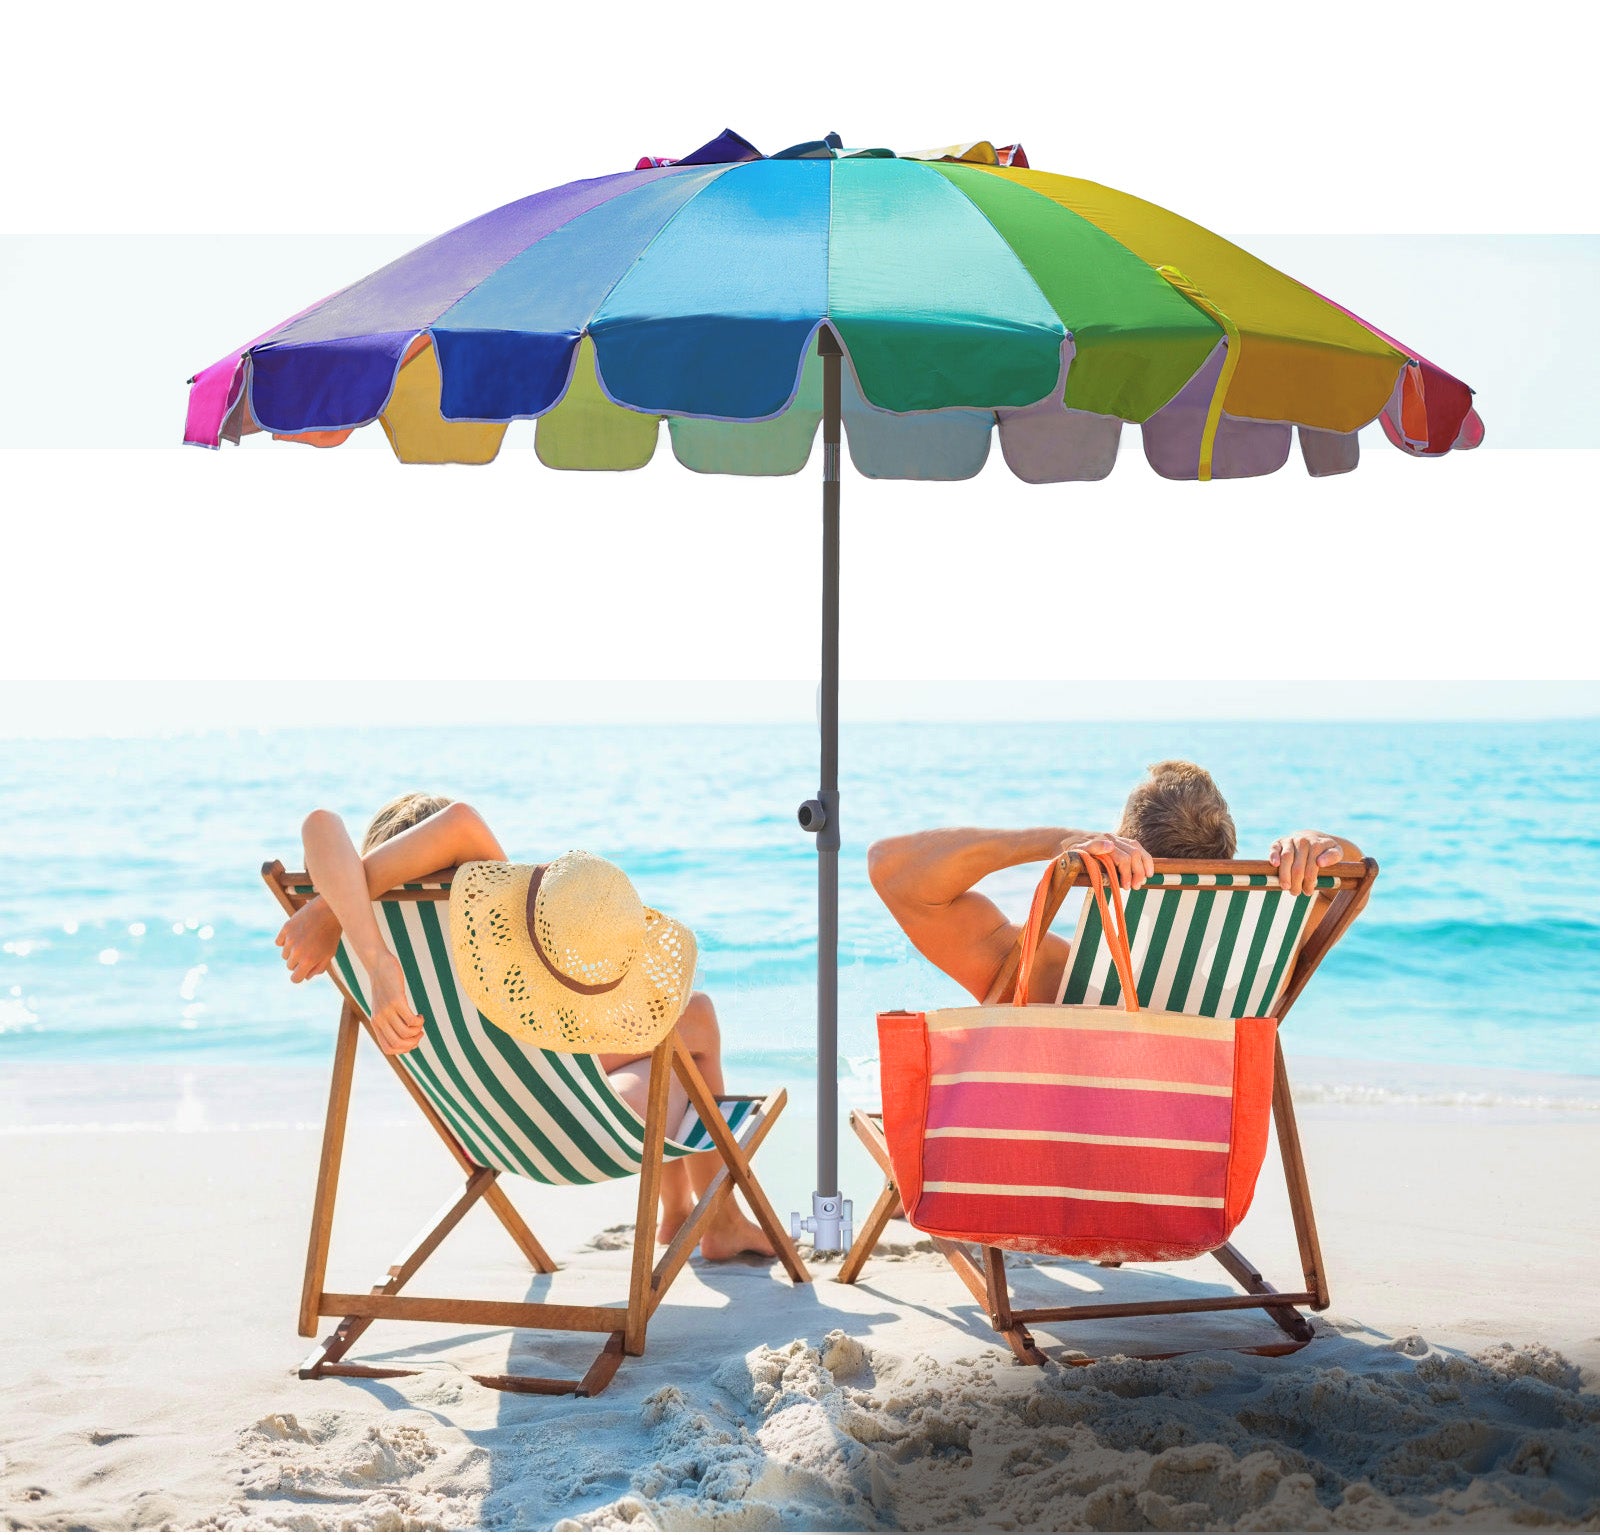 when choosing the right beach umbrella, people often have many questions